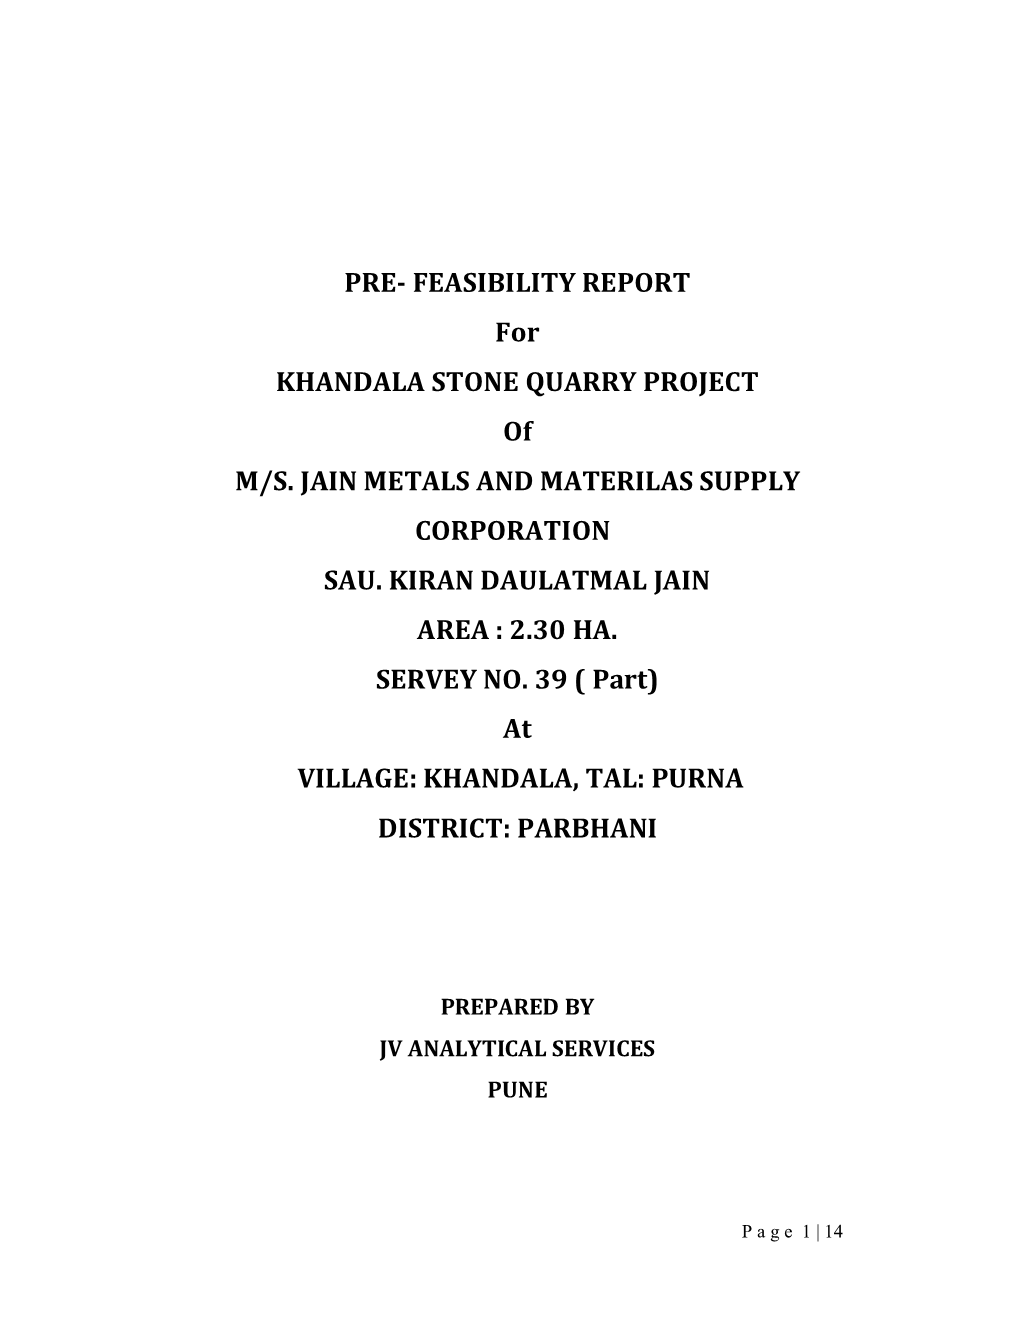 PRE- FEASIBILITY REPORT for KHANDALA STONE QUARRY PROJECT of M/S